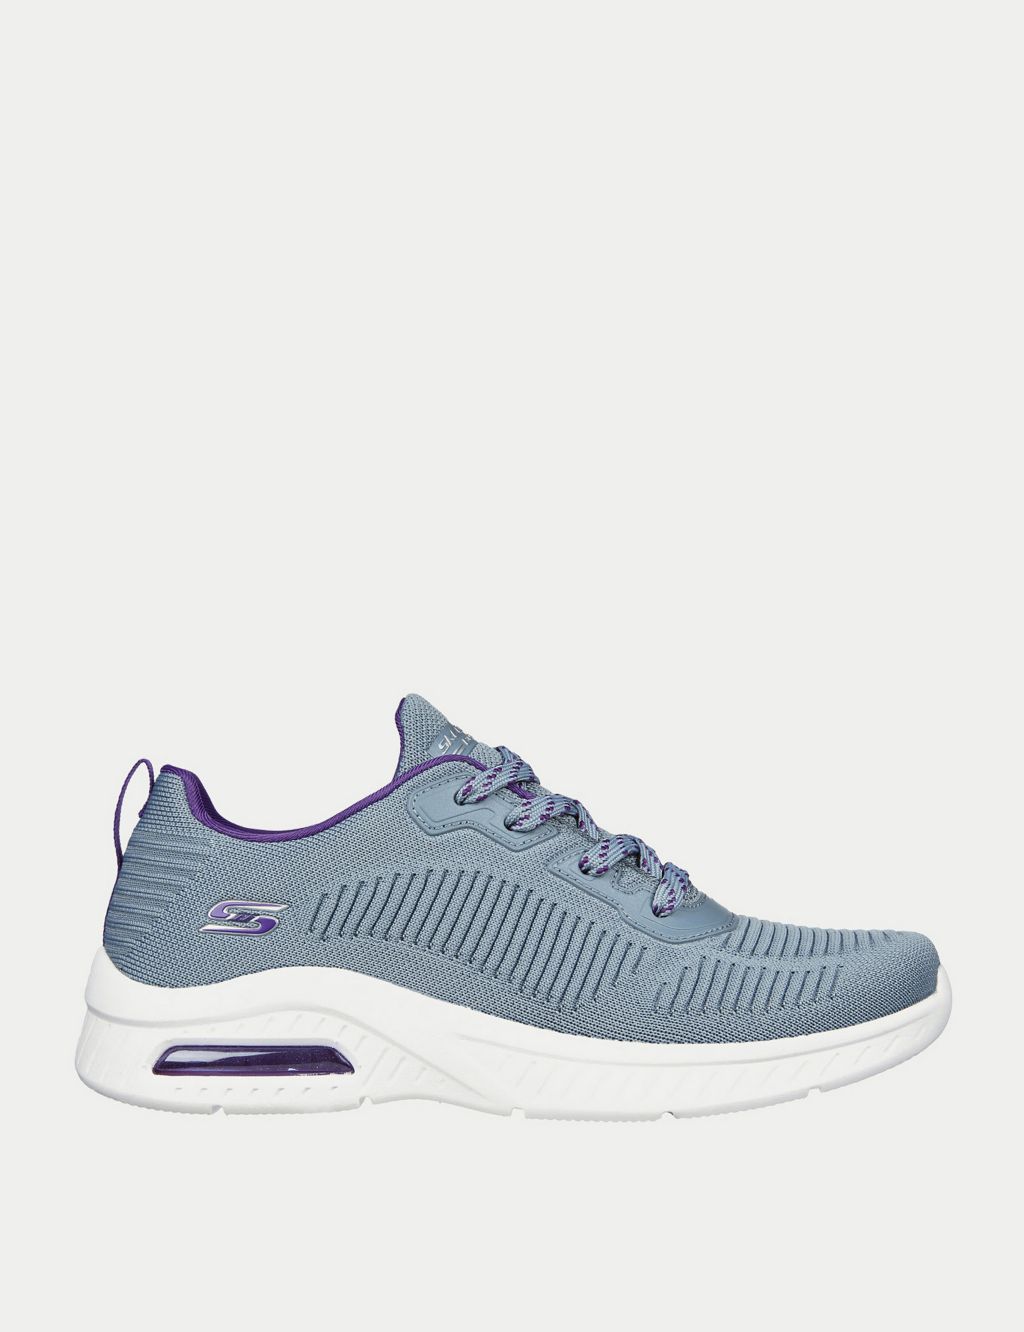 Squad Air Sweet Encounter Trainers image 1